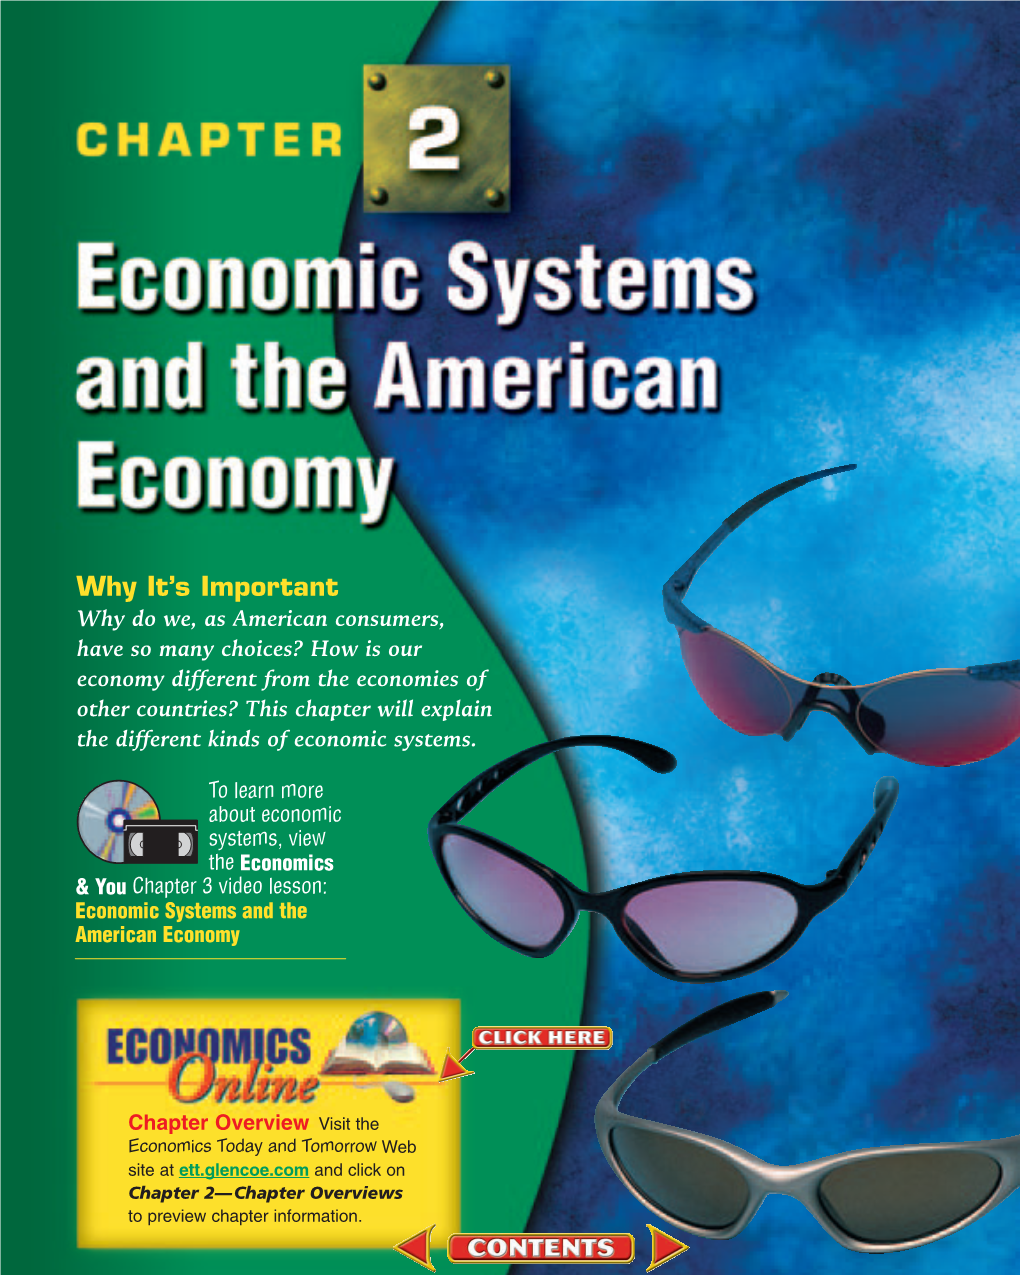 Chapter 2: Economic Systems and the American Economy